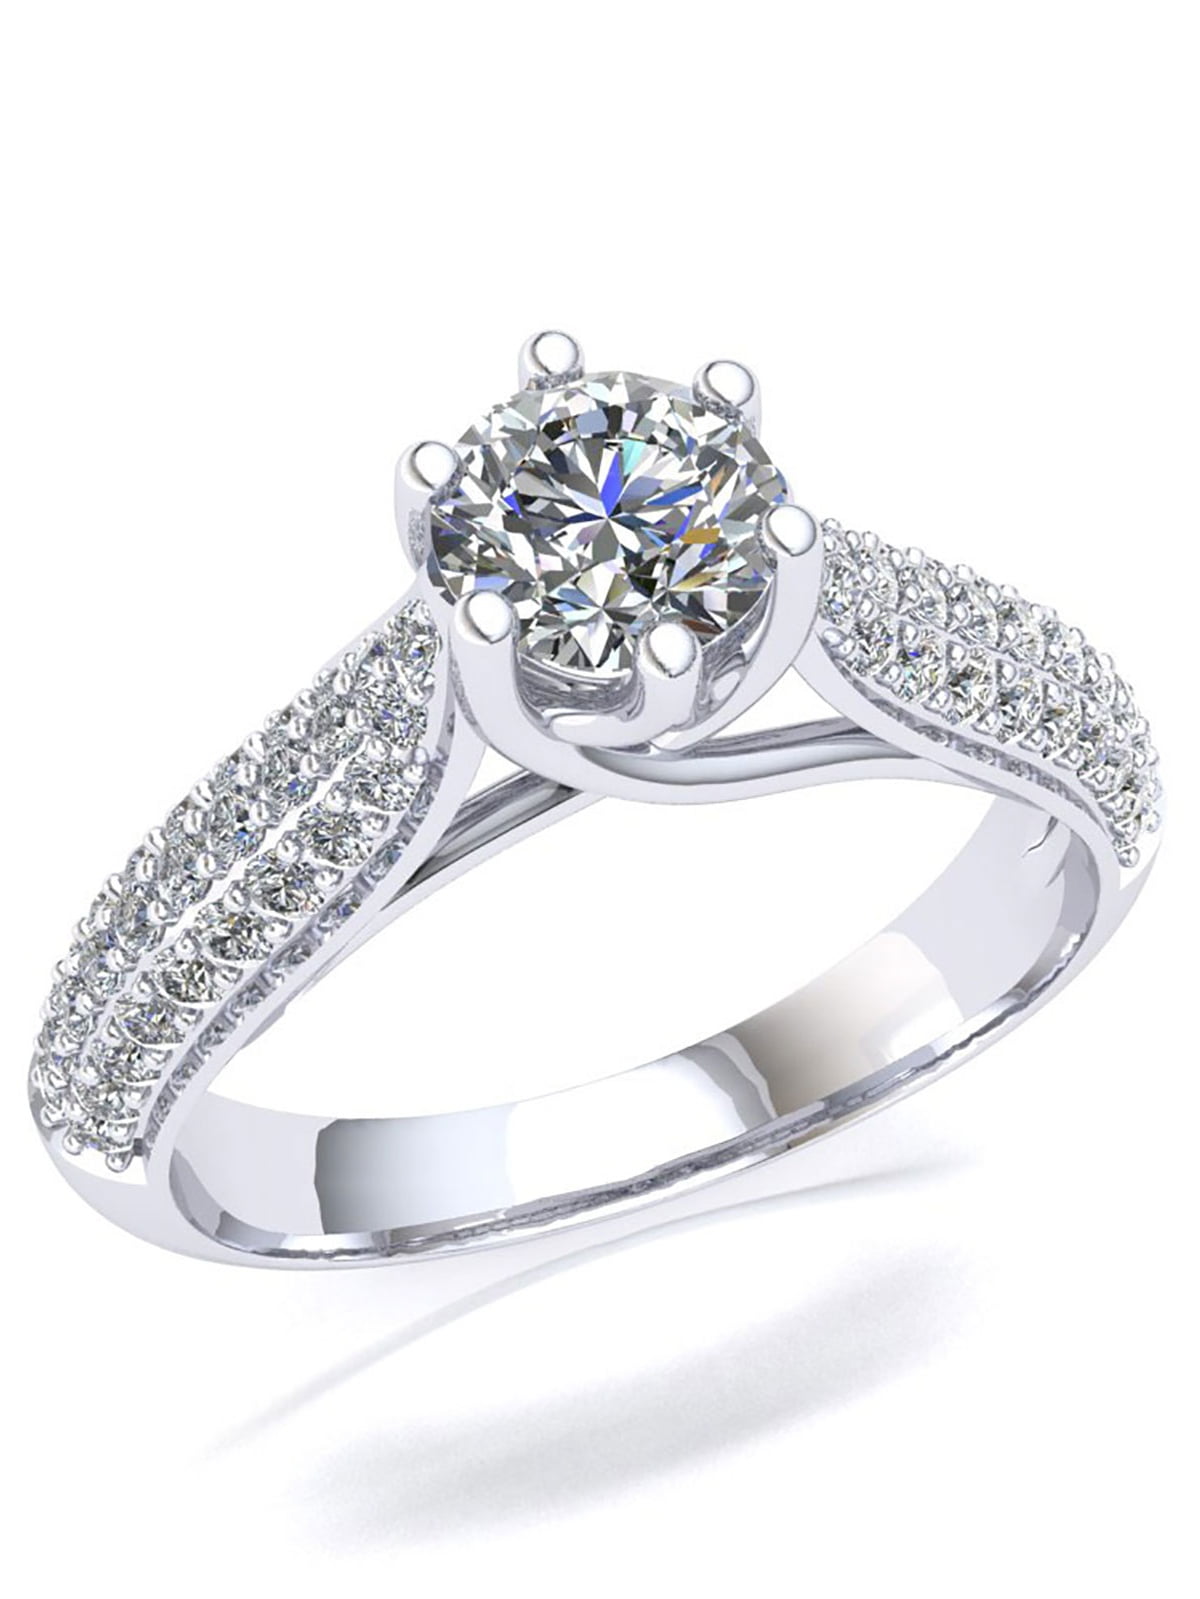 Details about   0.63Ct Oval Cut Diamond Engagement Ring 14K White Gold Her Wedding Rings Size 5 